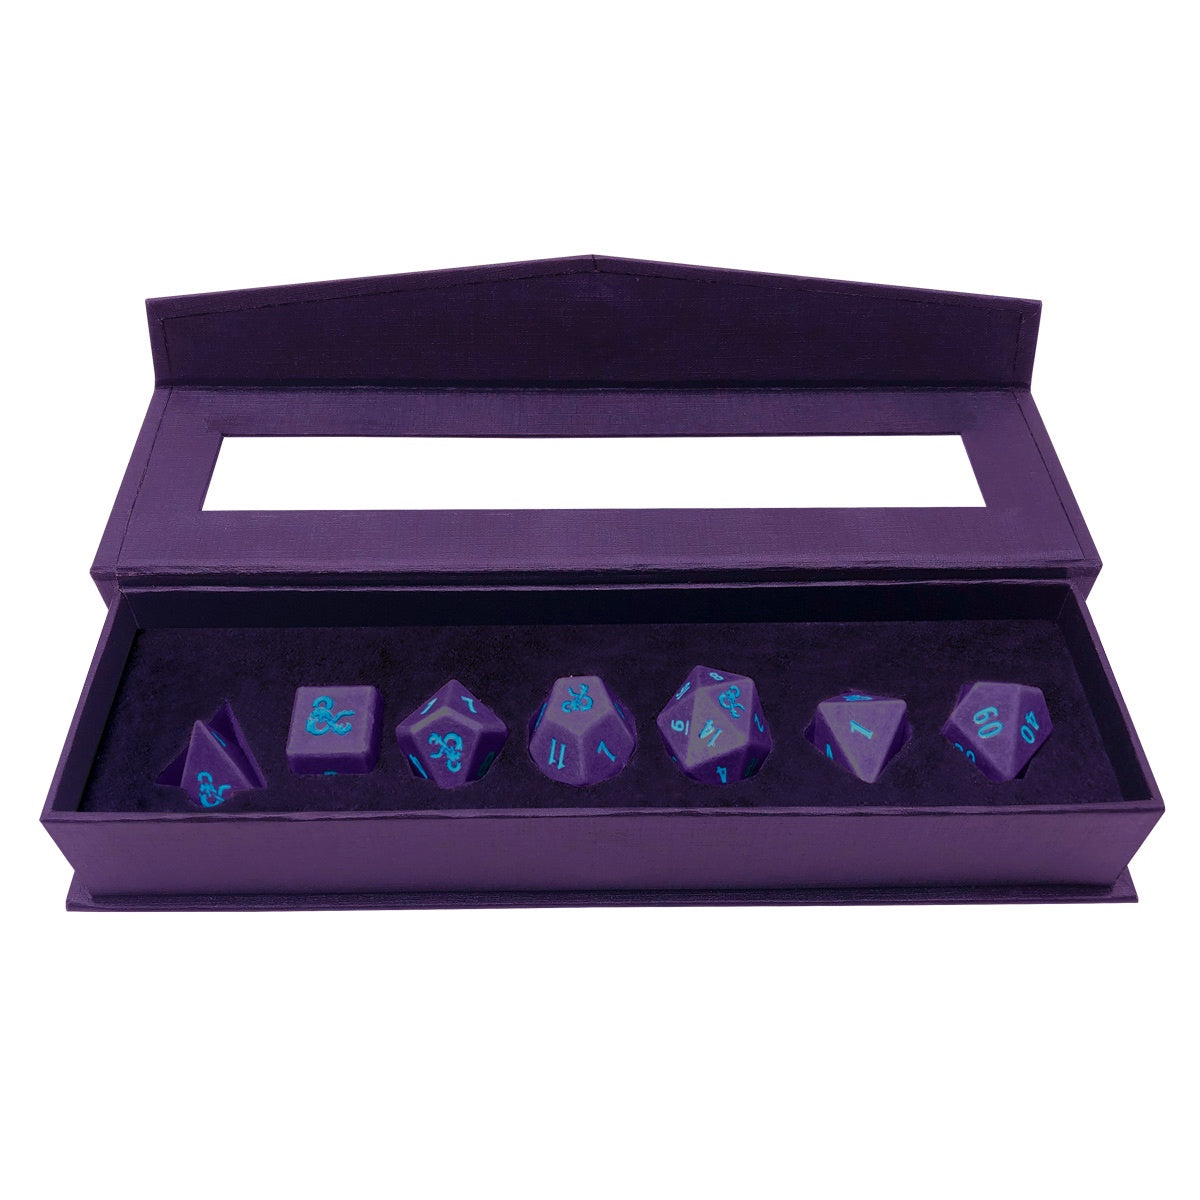 Ultra Pro: Heavy Metal D20 7 RPG Dice Set: Phandelver Champaign - Royal Purple and Sky Blue